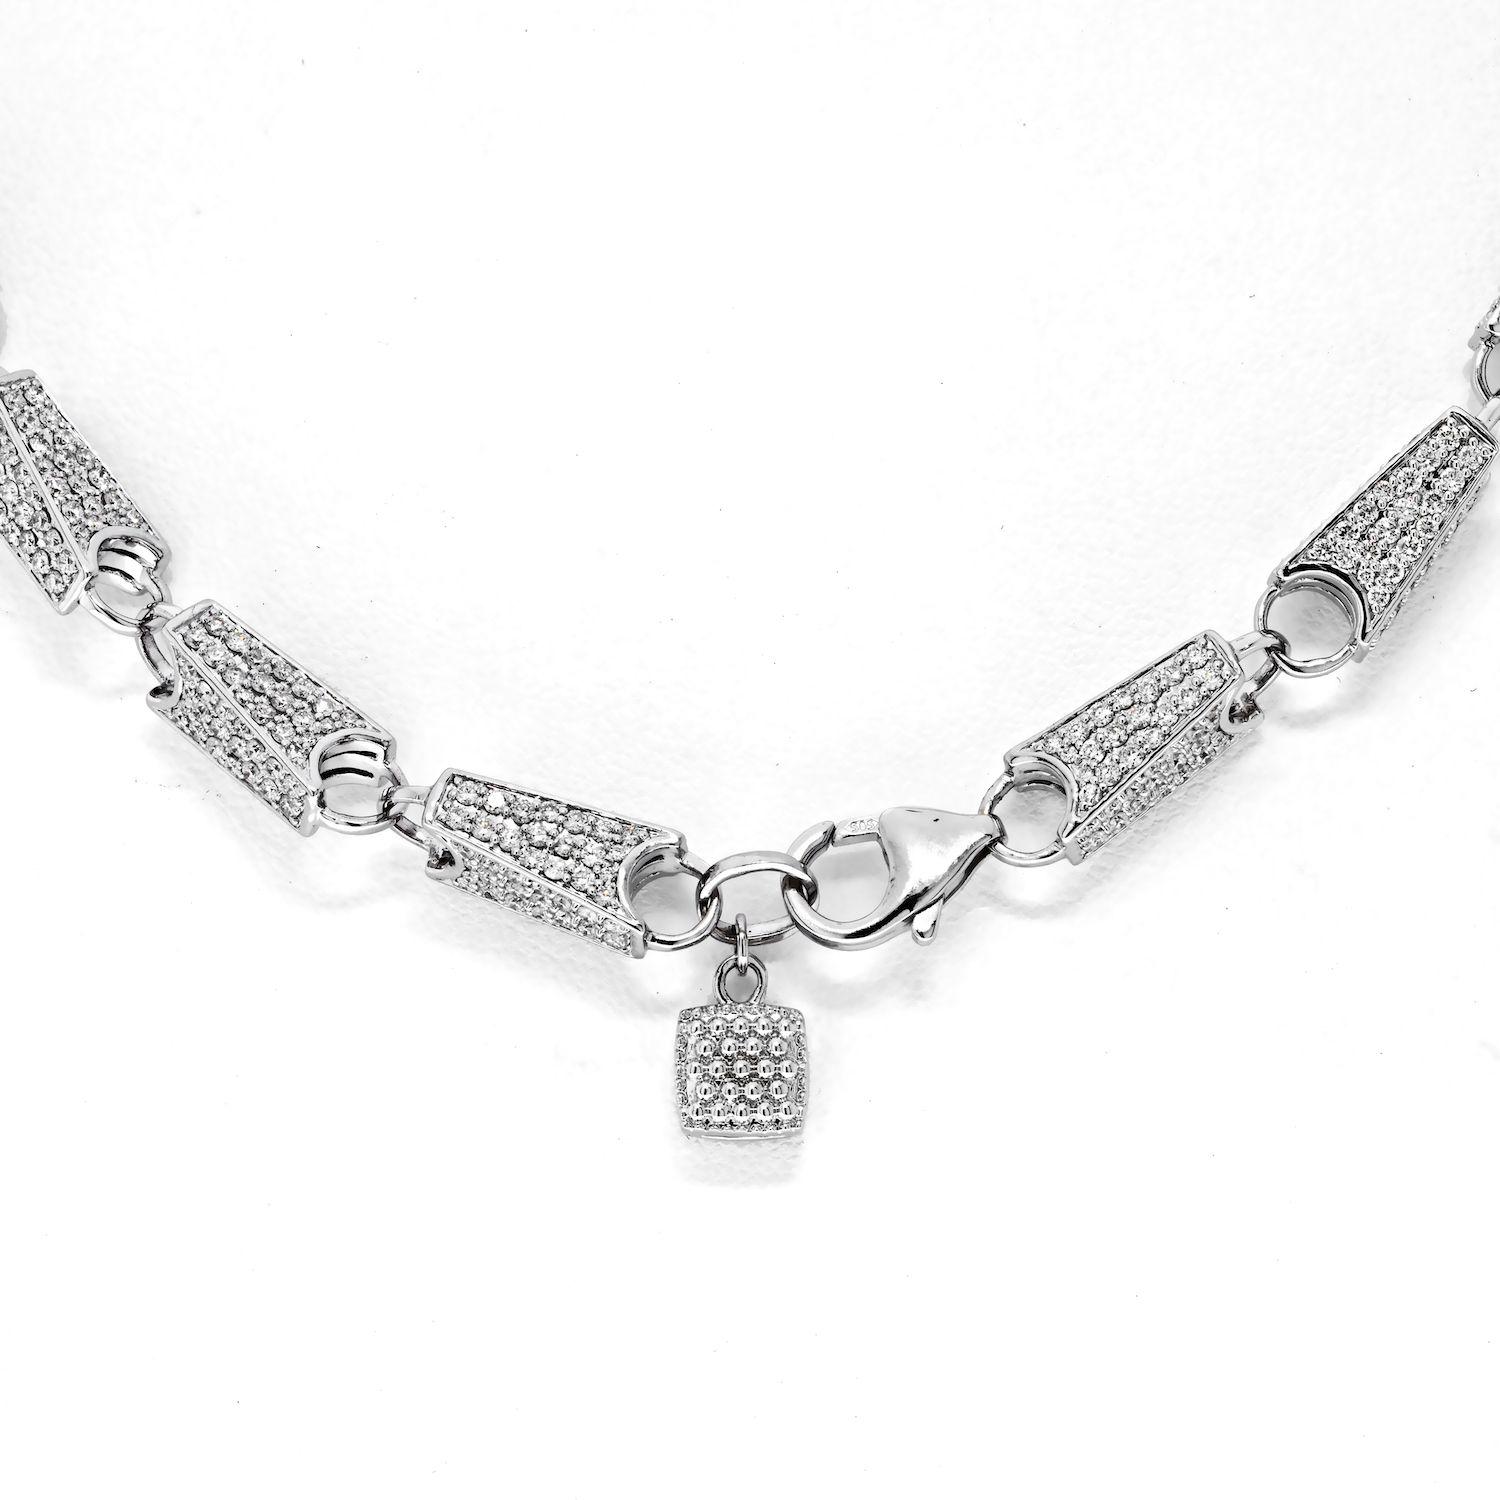 Contemporary diamond link chain necklace suitable for everyday wear as well as a special night out. It is fun and exciting to throw a diamond chain on over a white T-shirt or a white blouse. Best of all is when you wear this diamond necklace next to